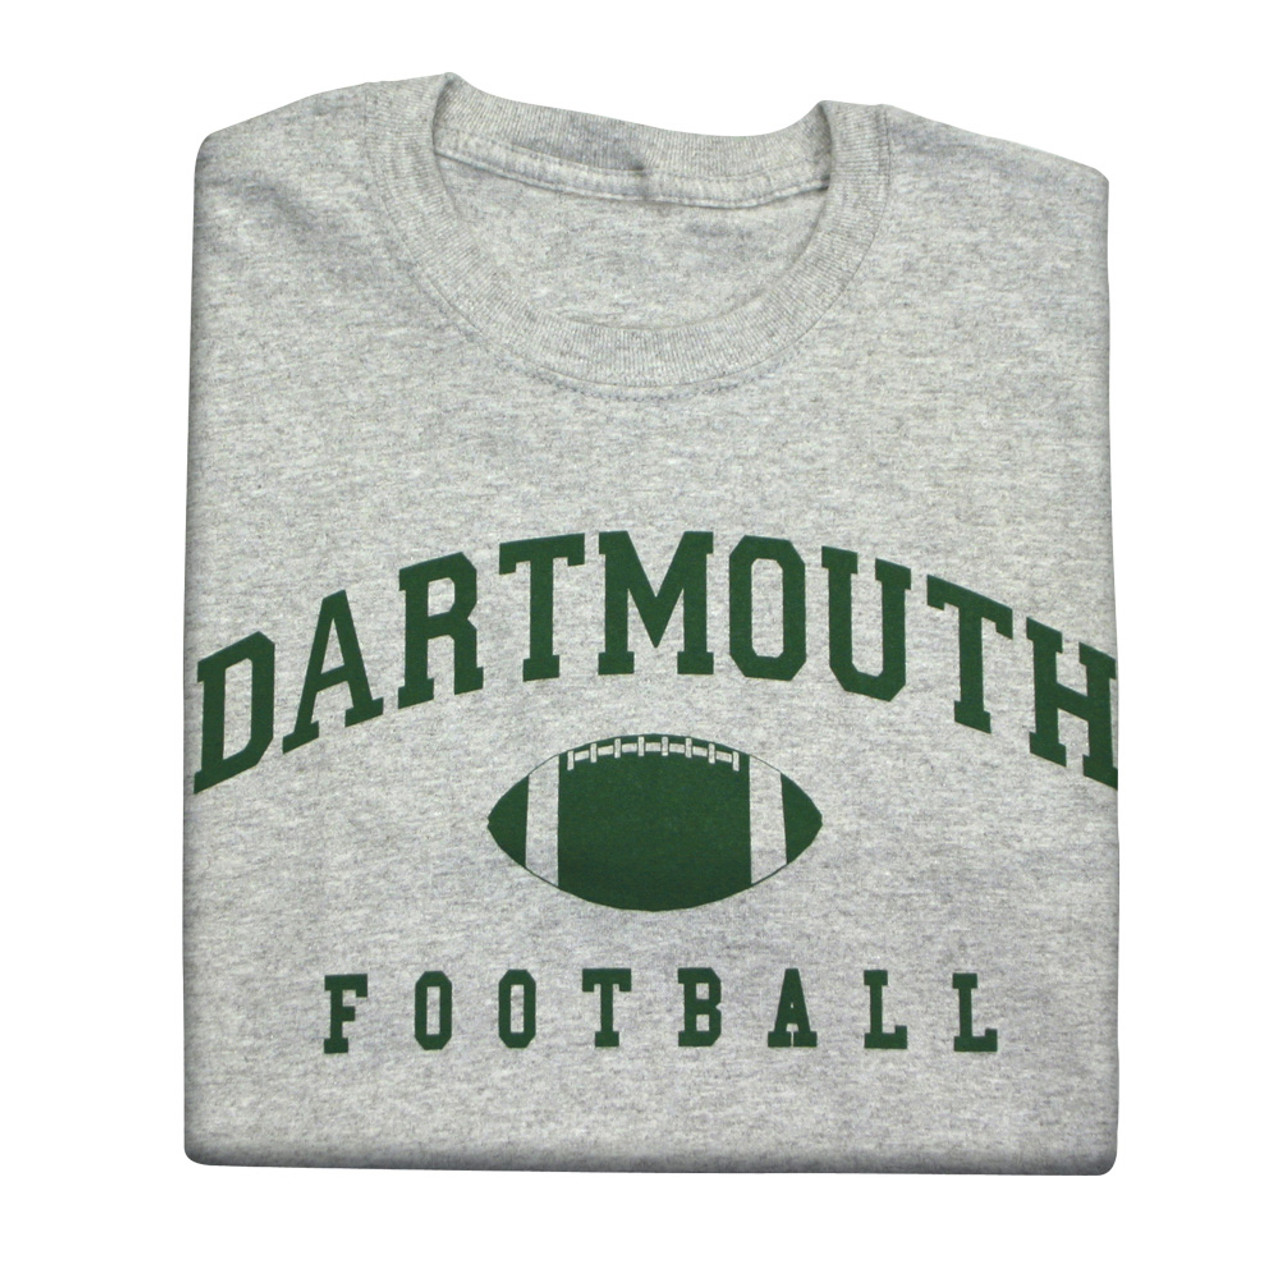 Dartmouth Football Football t-shirt with College l